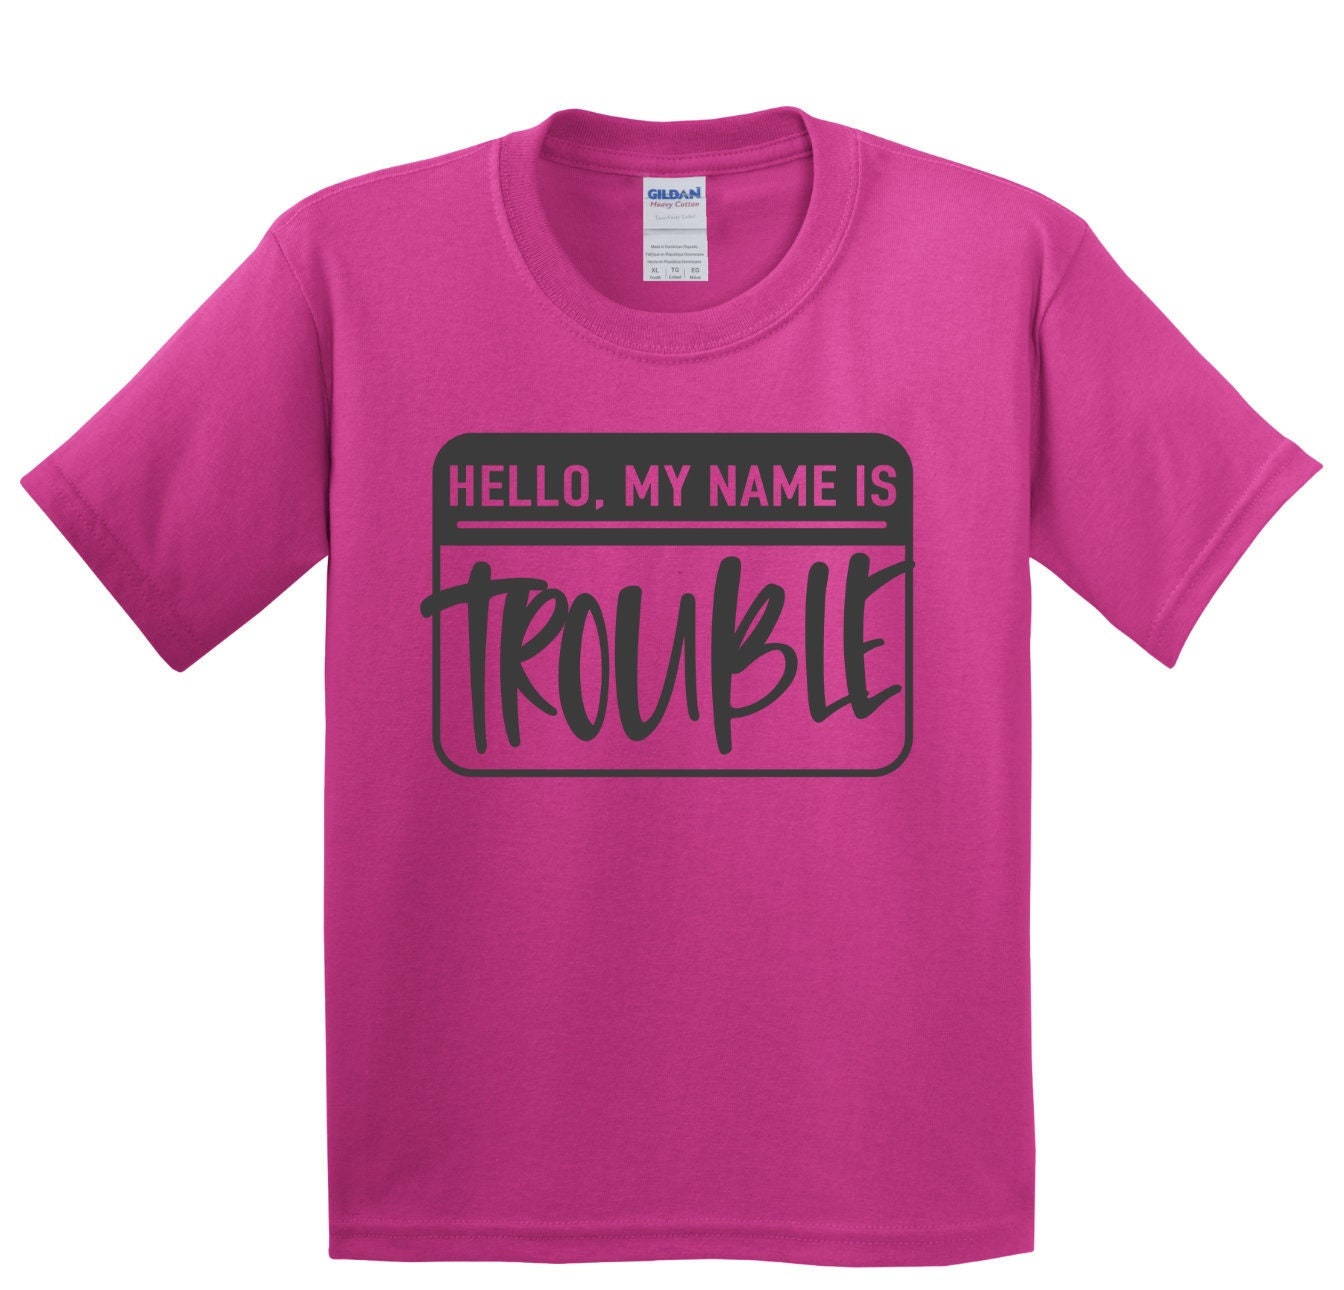 My Name is Trouble Kids Tee, Cotton